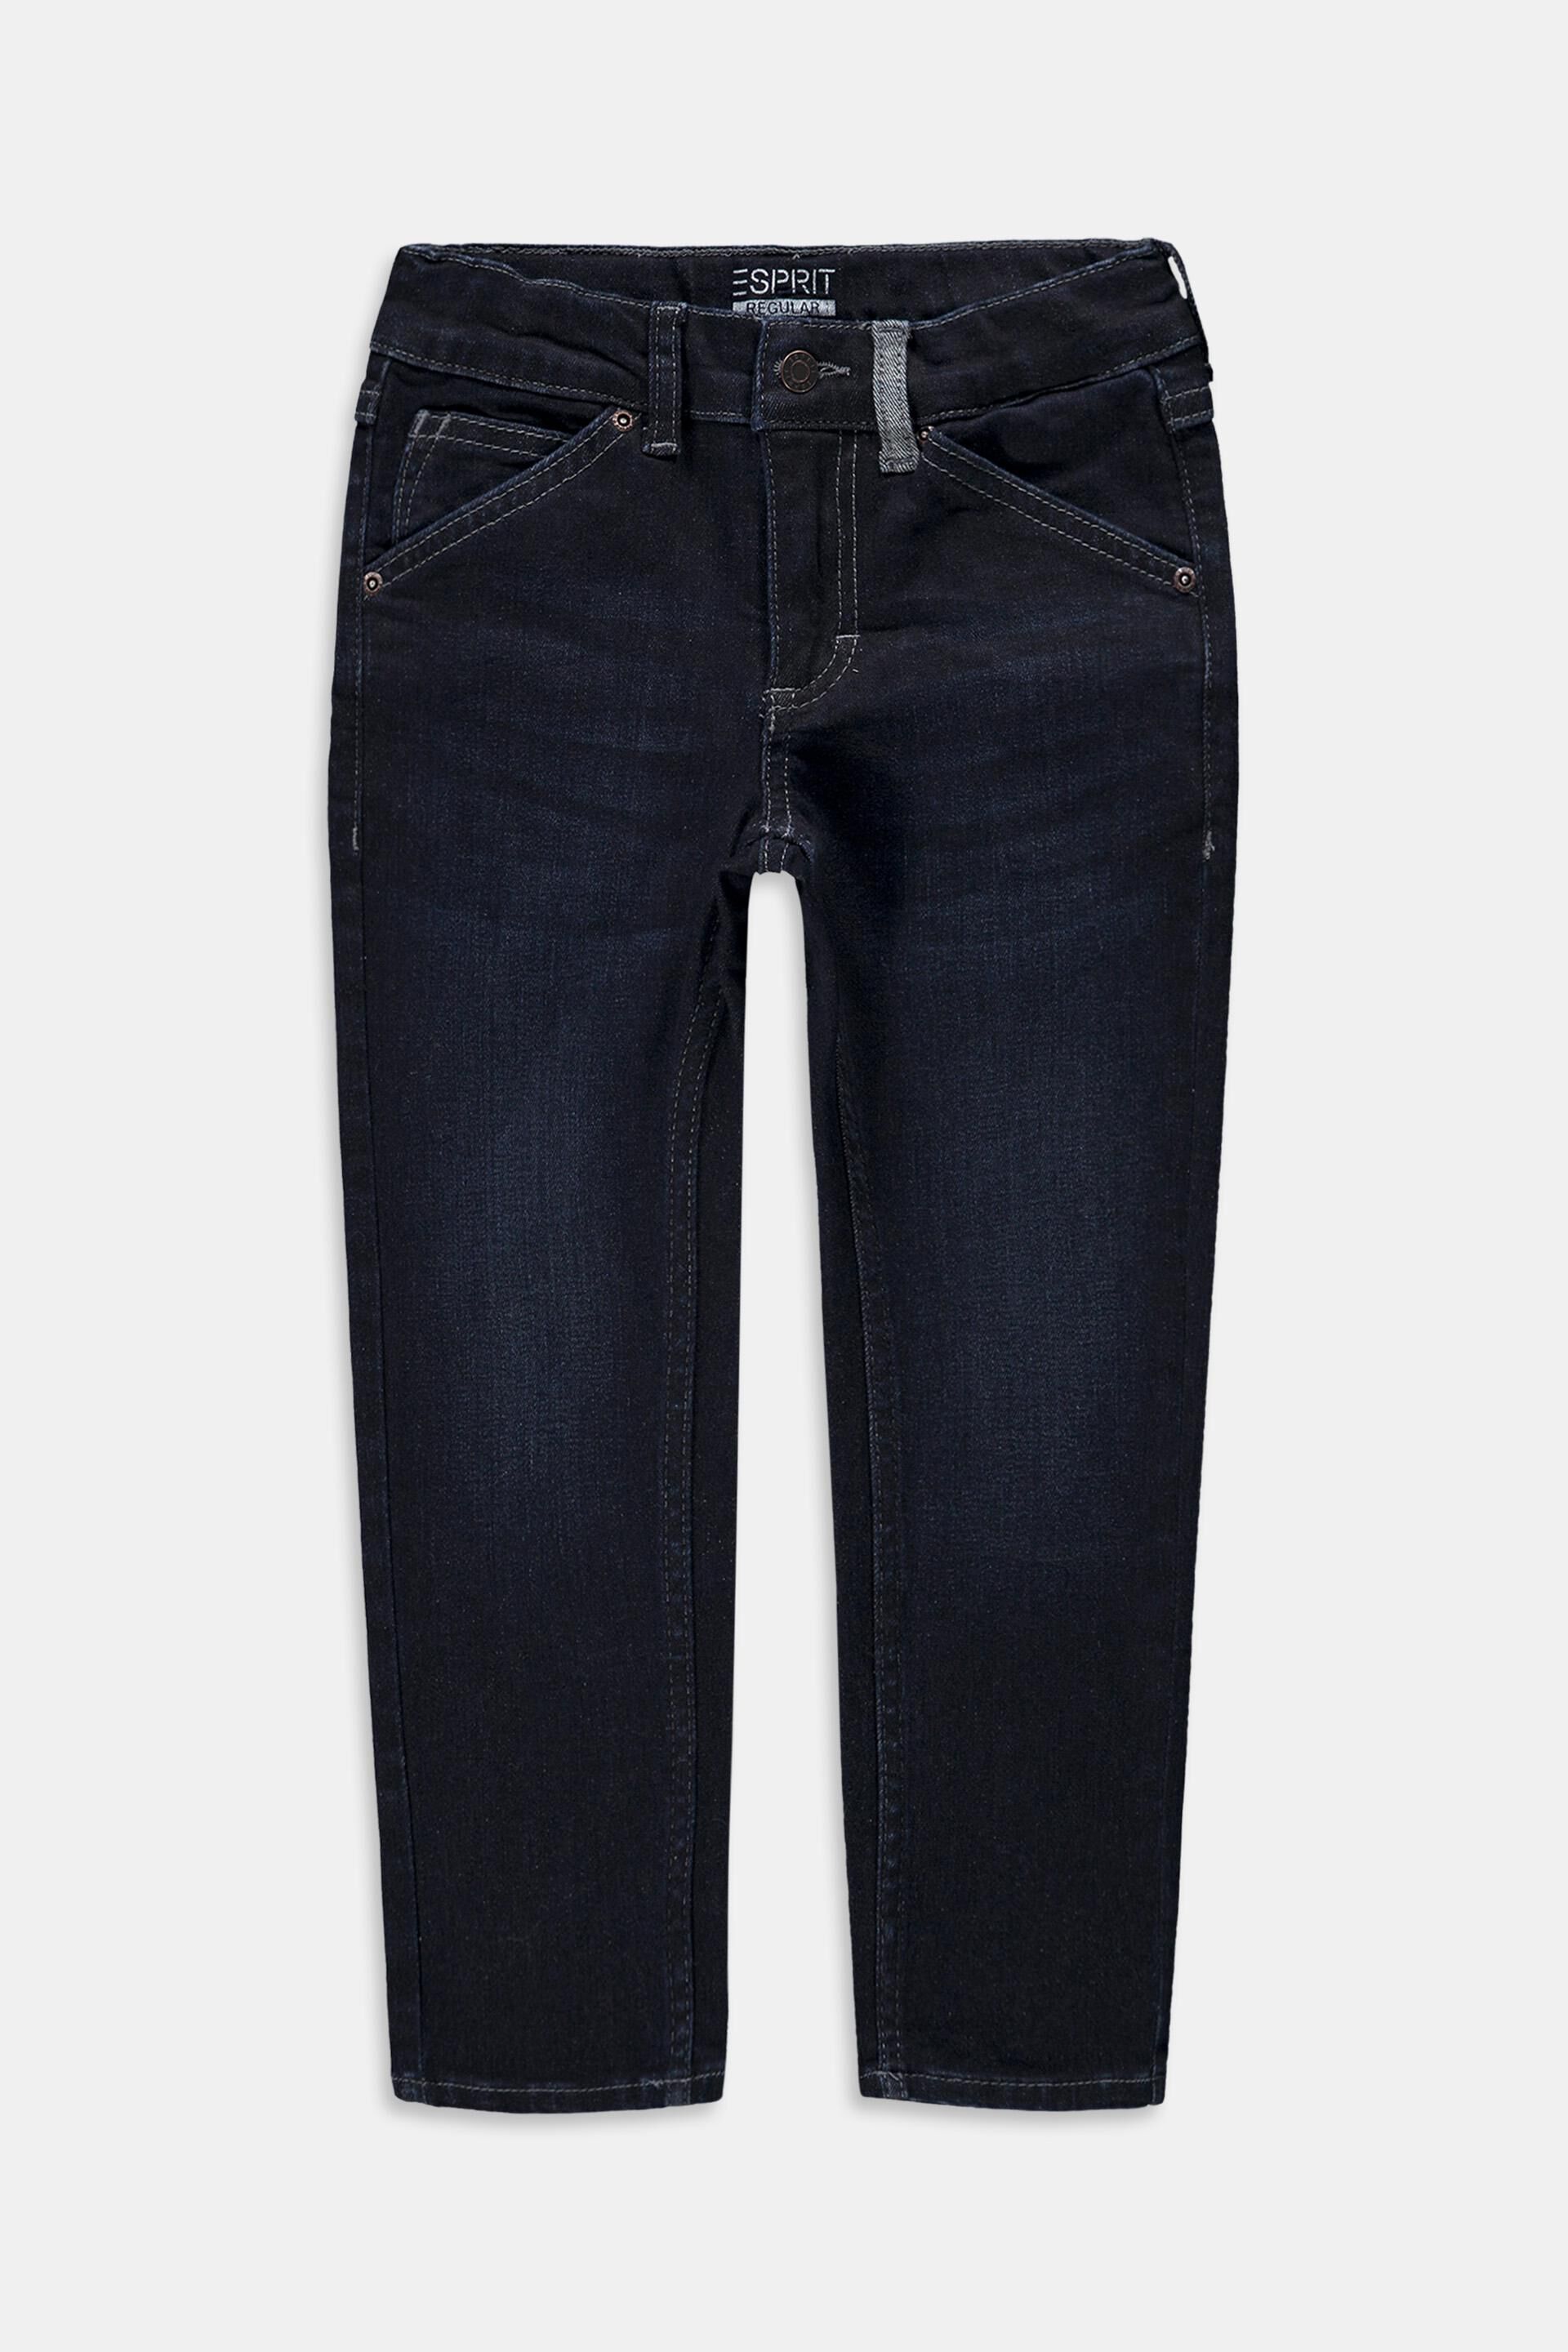 Esprit with adjustable Jeans waistband